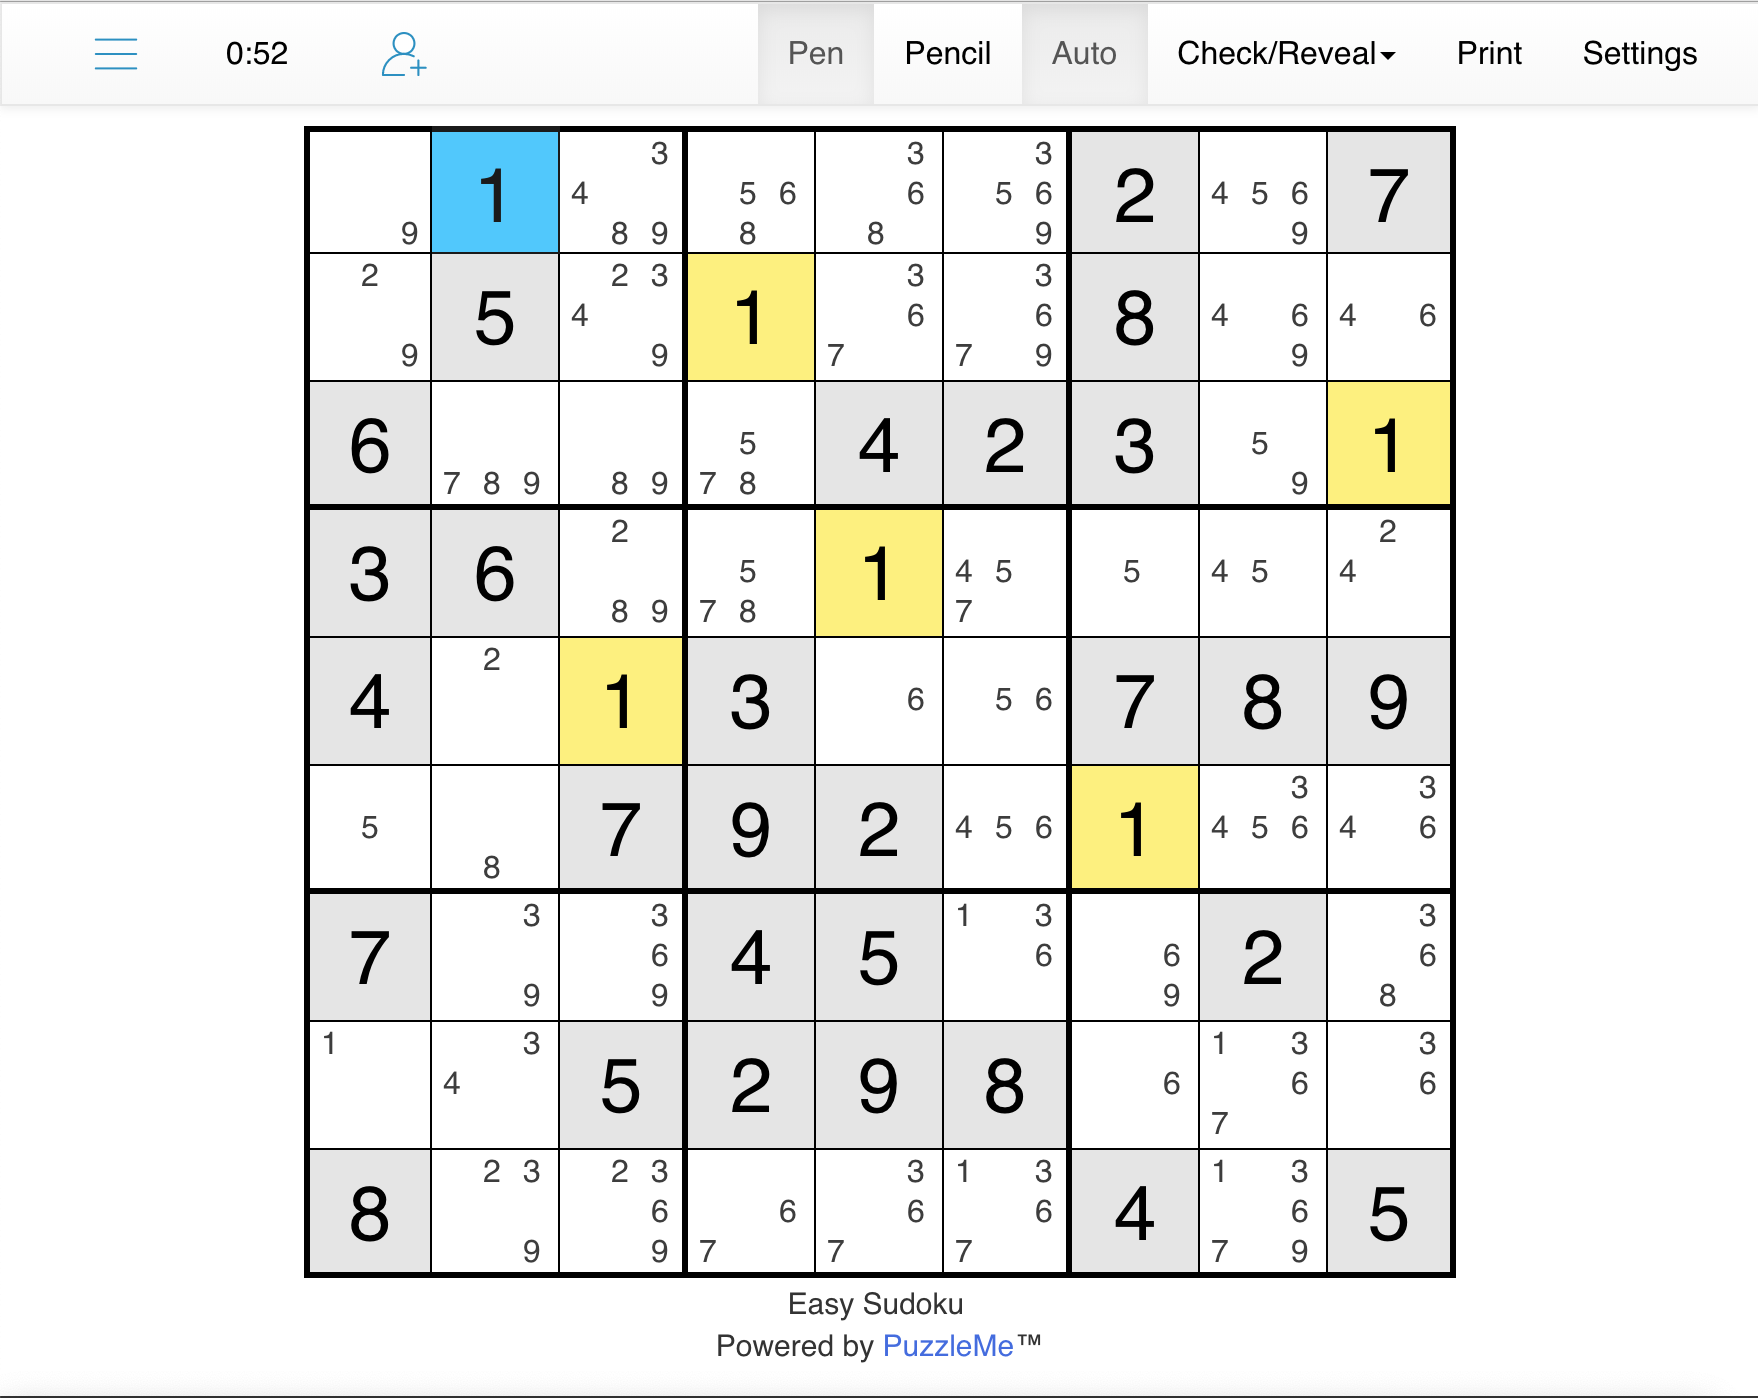 A 9 by 9 sudoku puzzle shown with possible candidates for the grid